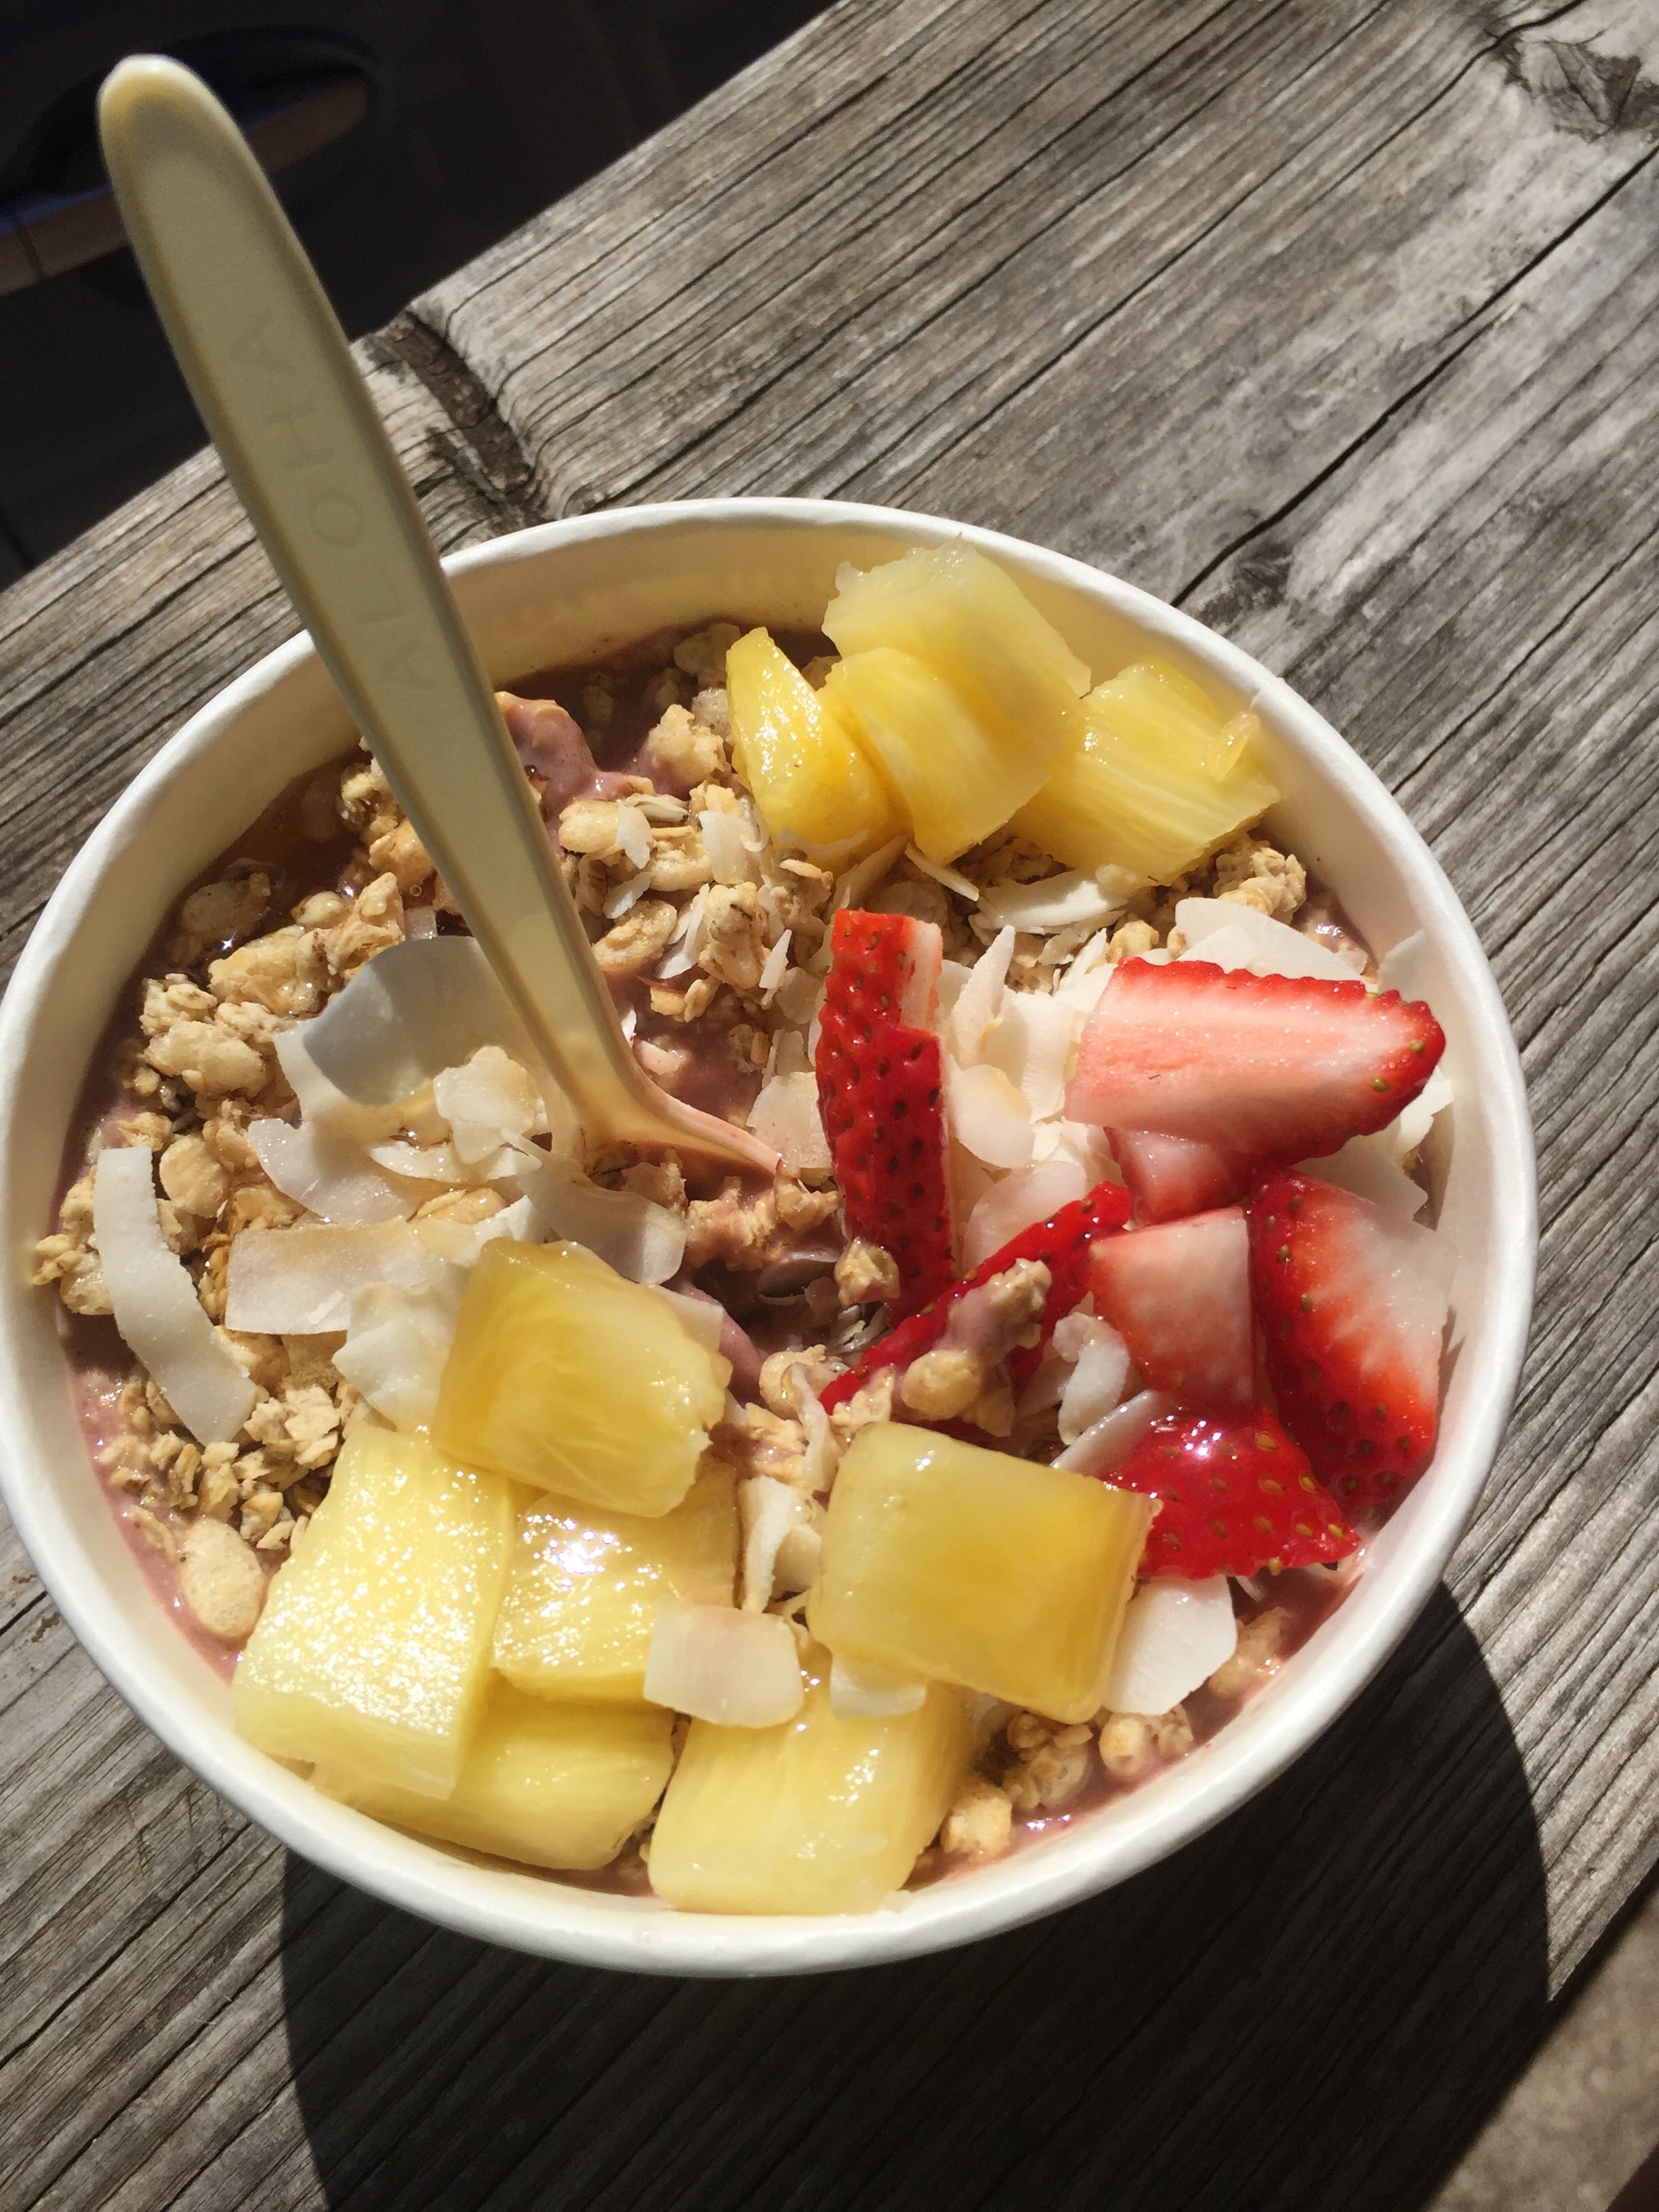 BEST ACAI BOWLS ON OAHU - Where to find the best acai bowls in Oahu, Hawaii + what to order when you get there! | Acai Bowls - Acai Bowls Oahu - Acai Bowls Hawaii - Acai Bowl Ideas - Best Acai Bowl Oahu - Best Acai Bowl Hawaii - Acai Bowl - Hawaii Travel Blog - #hawaii #oahu #acaibowl